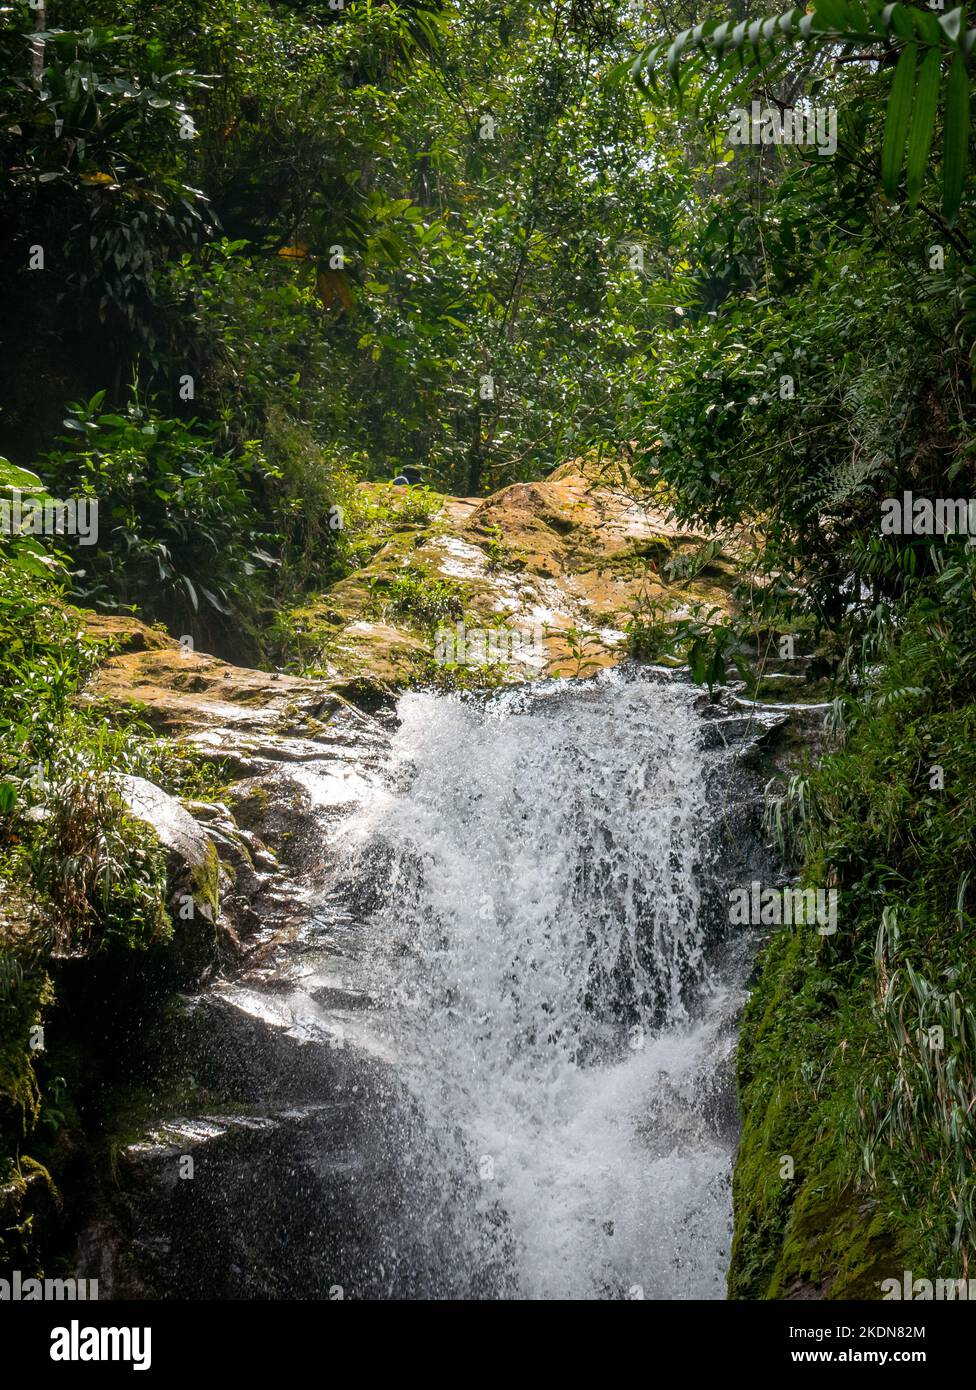 Lots of Vegetation, Plants, Moss on the Rocks at Waterfalls in Envigado, Antioquia, Colombia Stock Photo